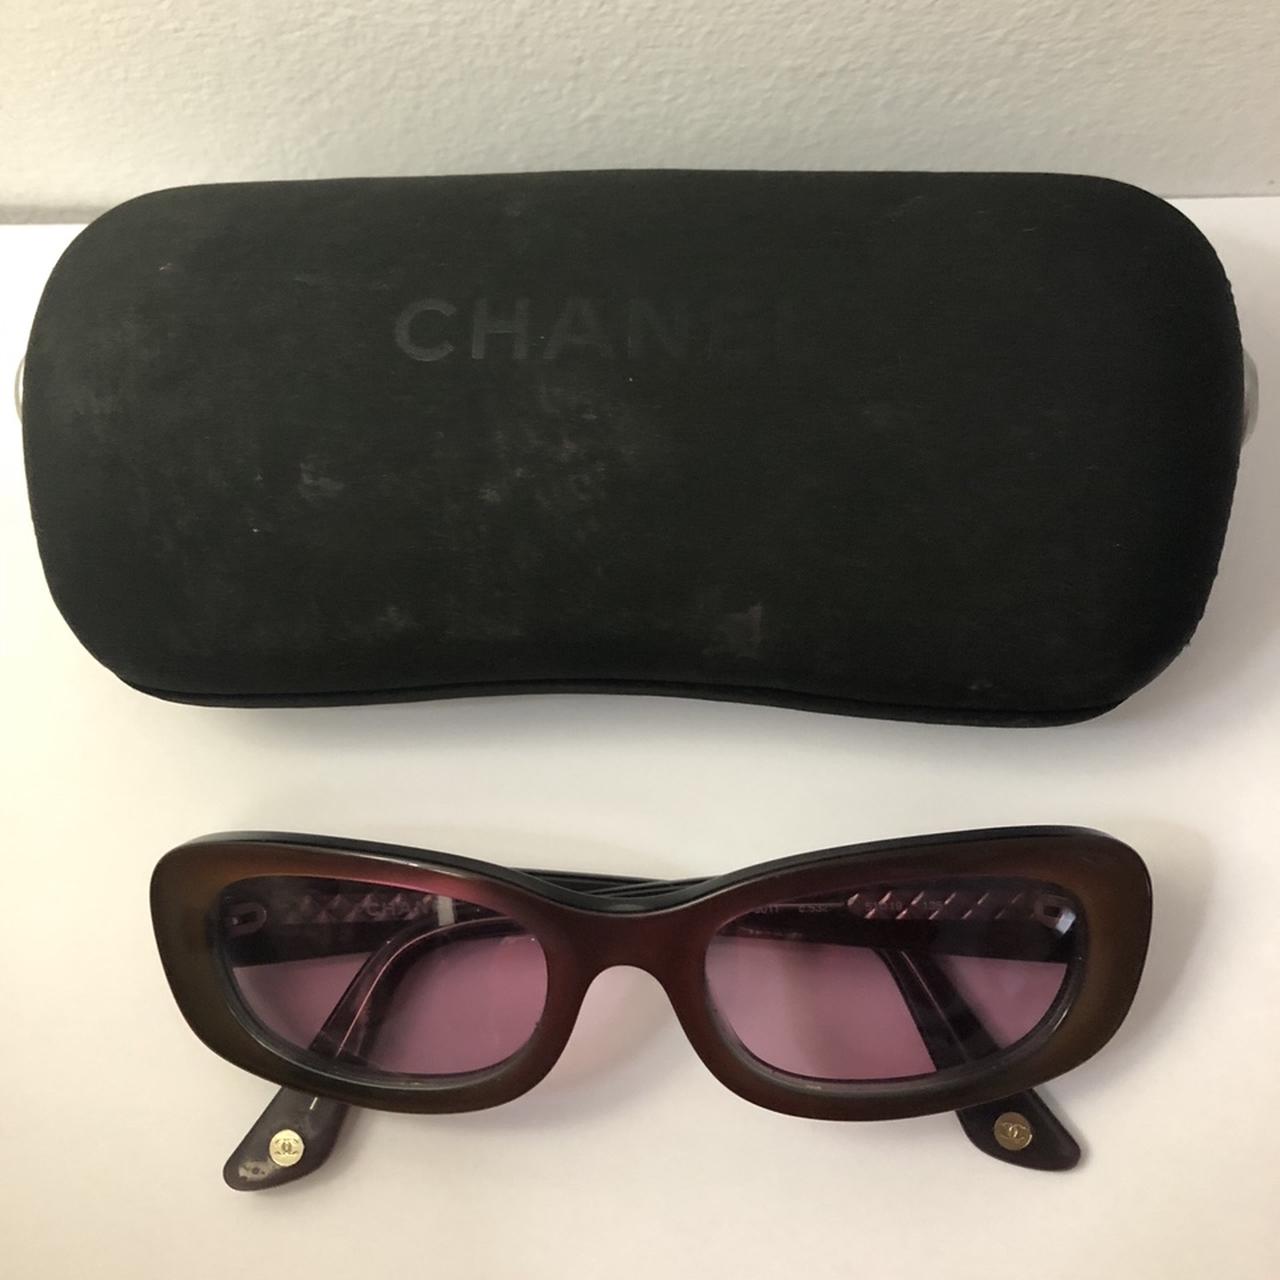 5011 chanel sunglasses try on｜TikTok Search